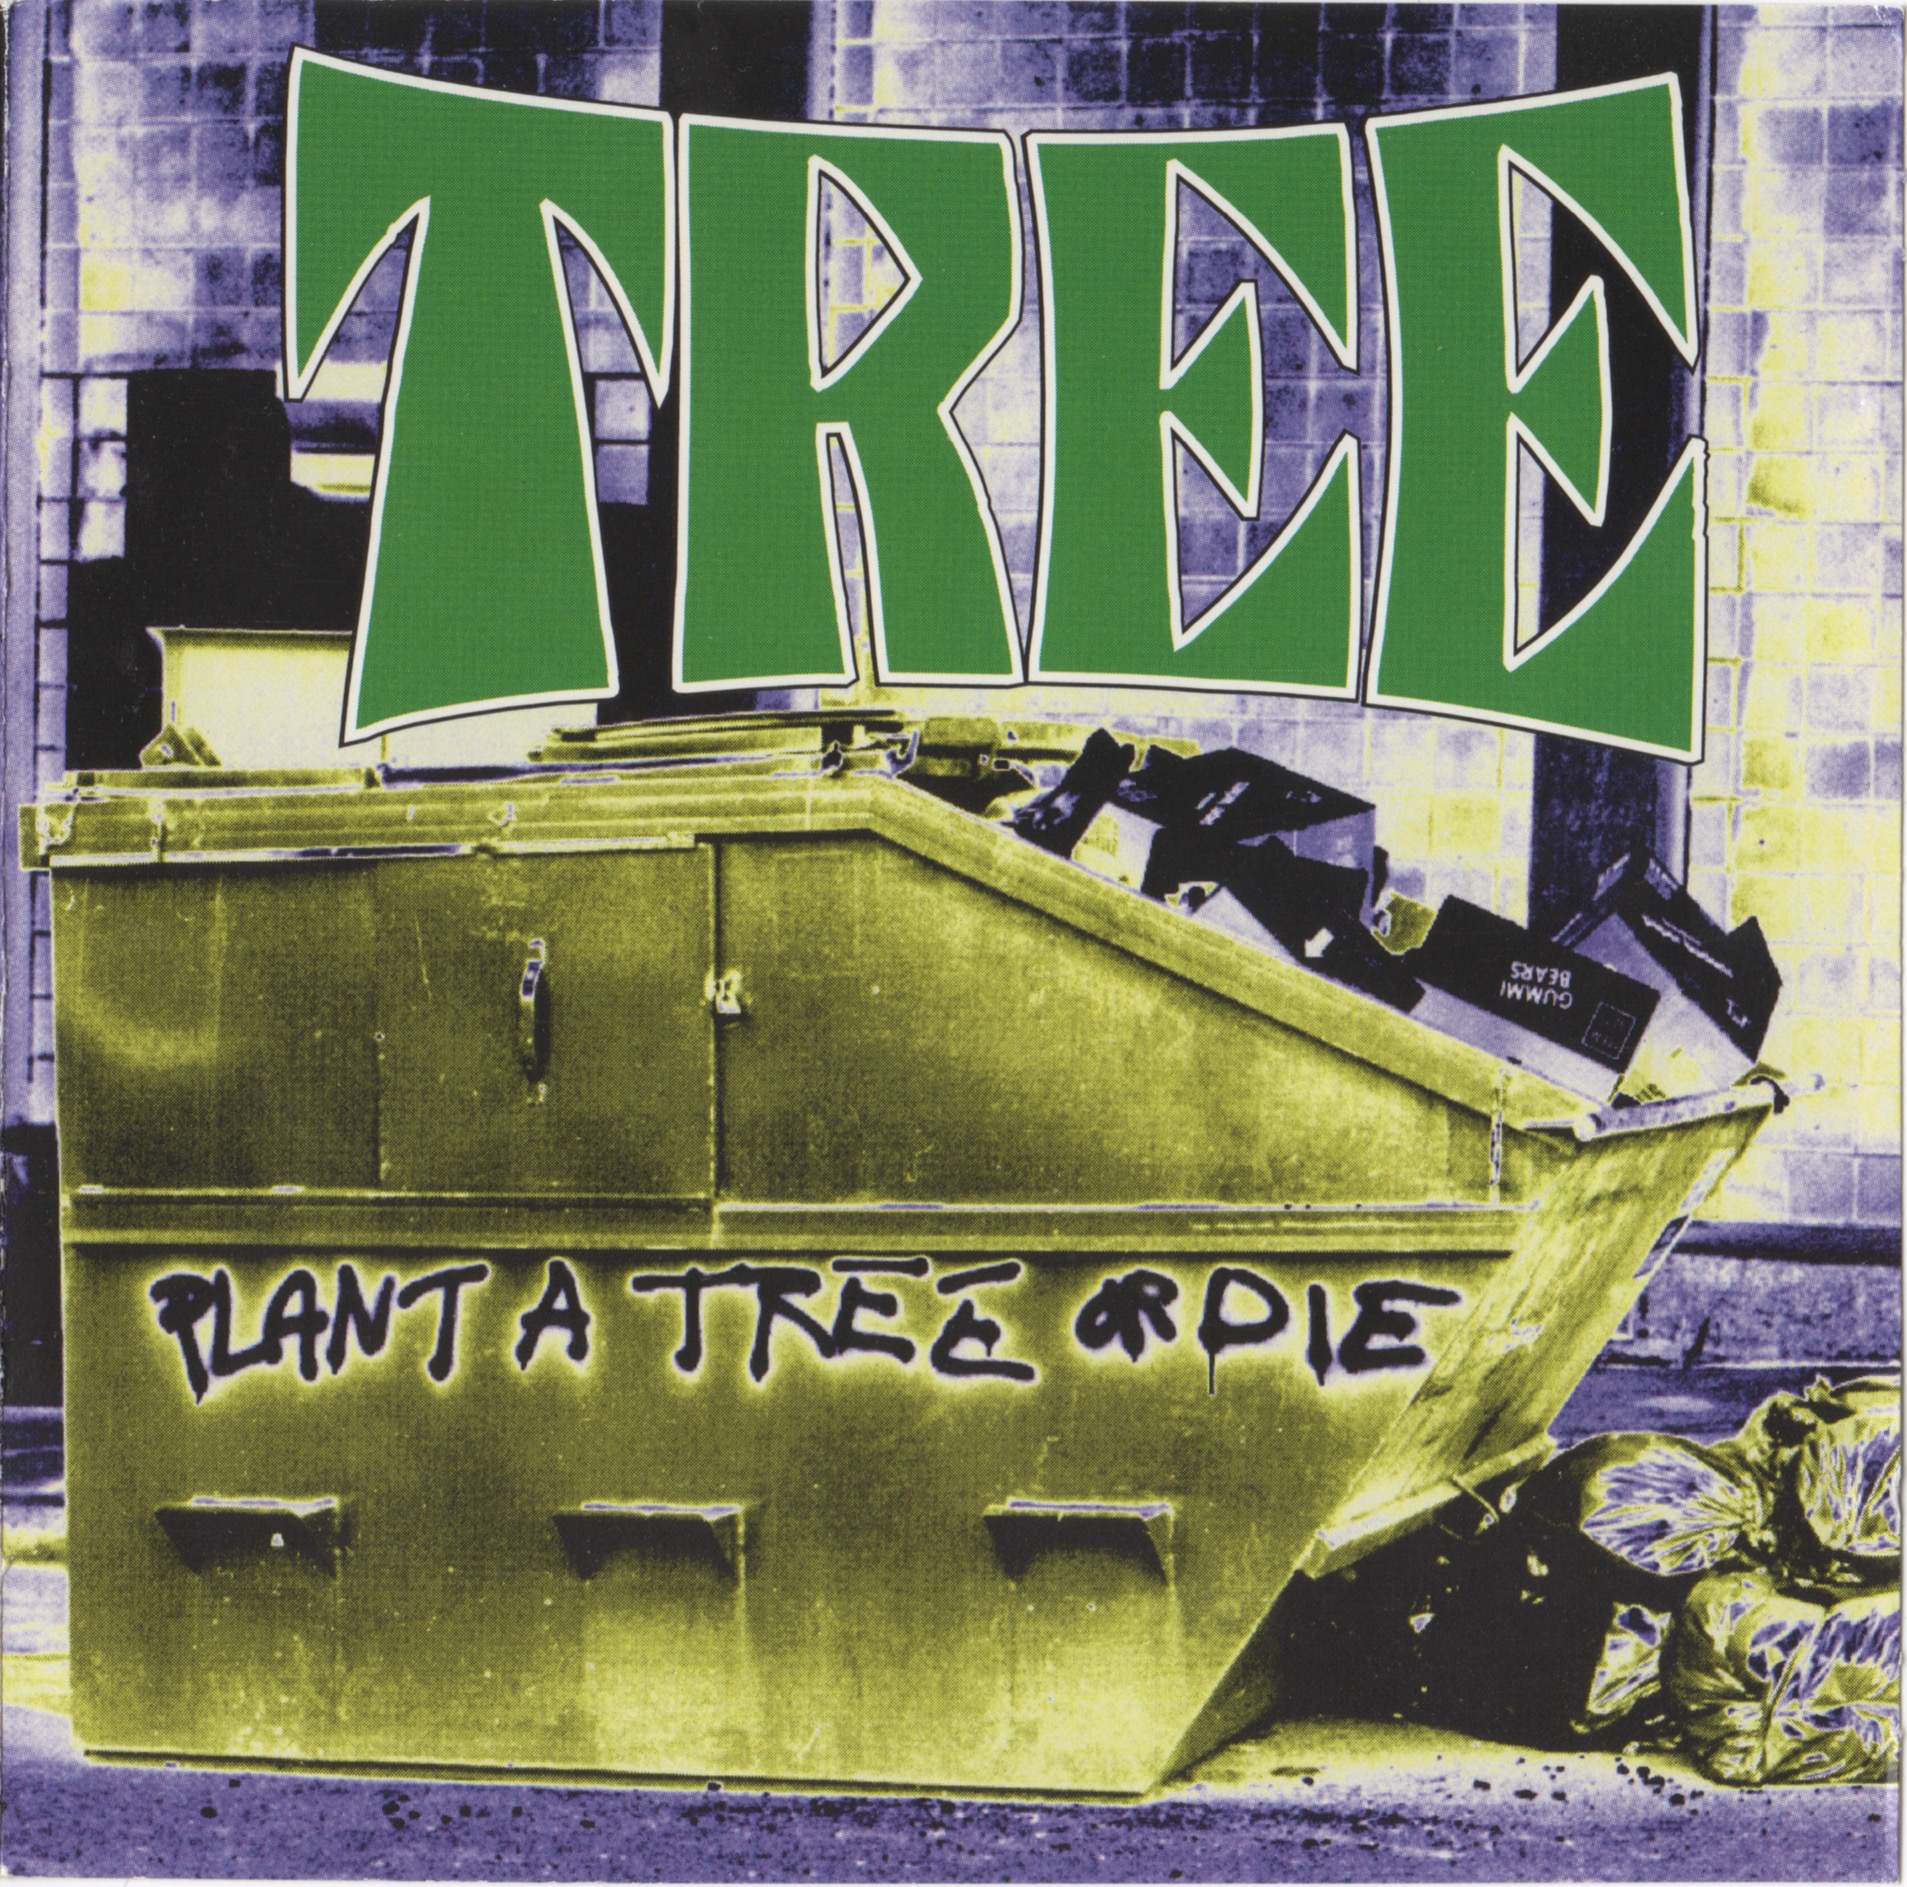 Tree Plant a Tree or Die Cover